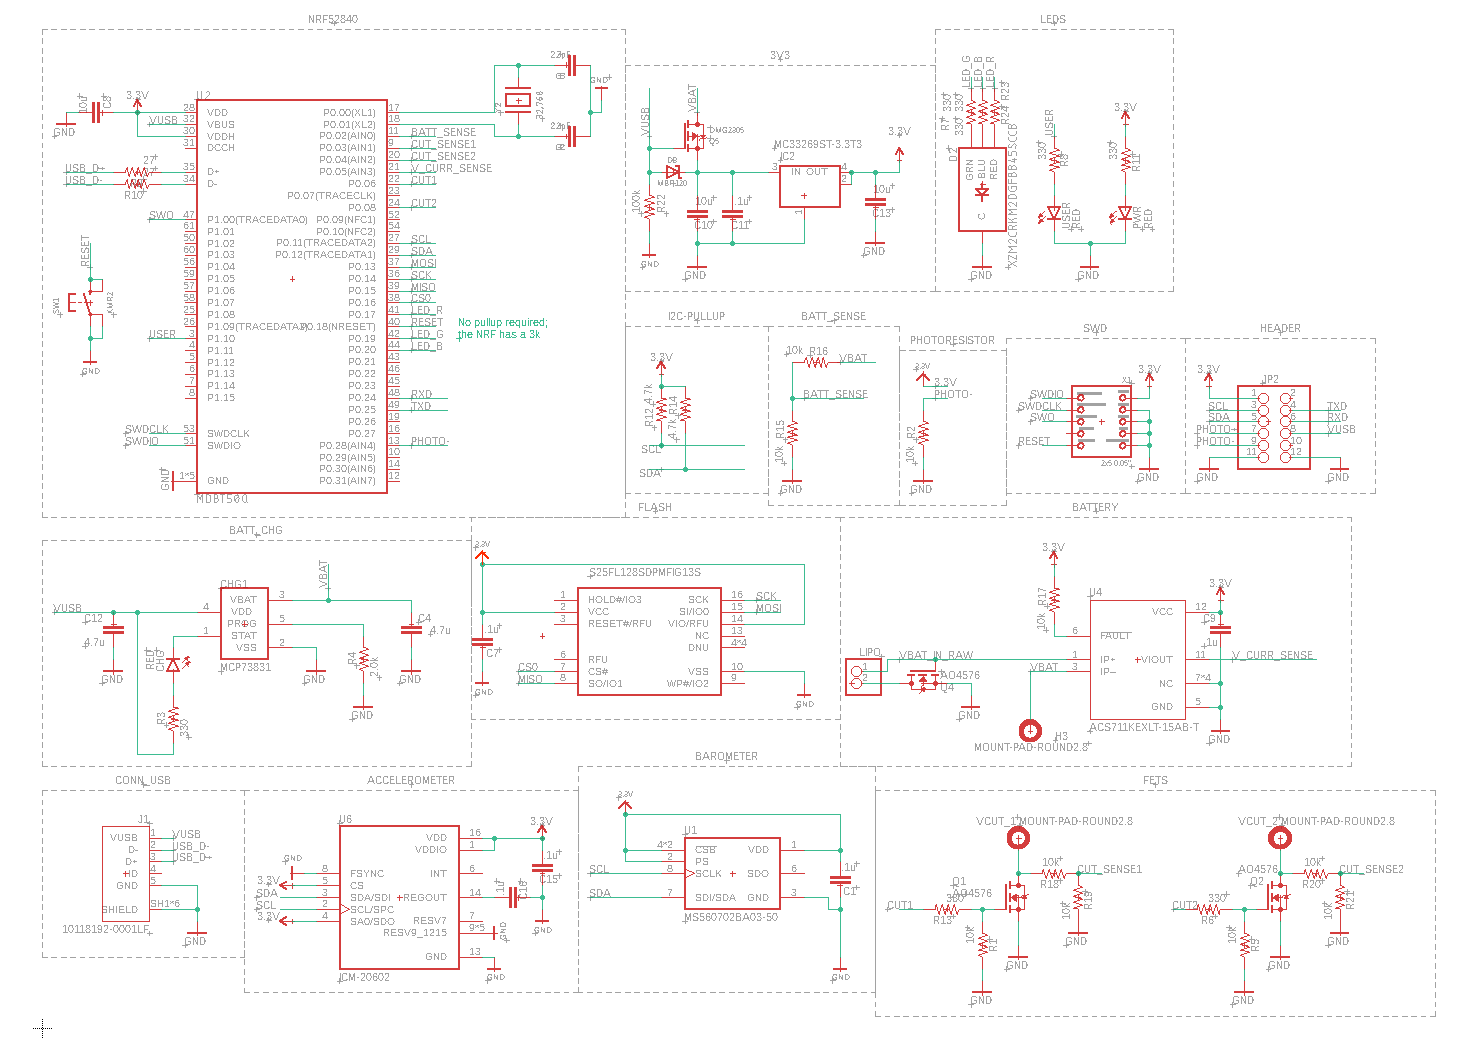 Schematic in Eagle